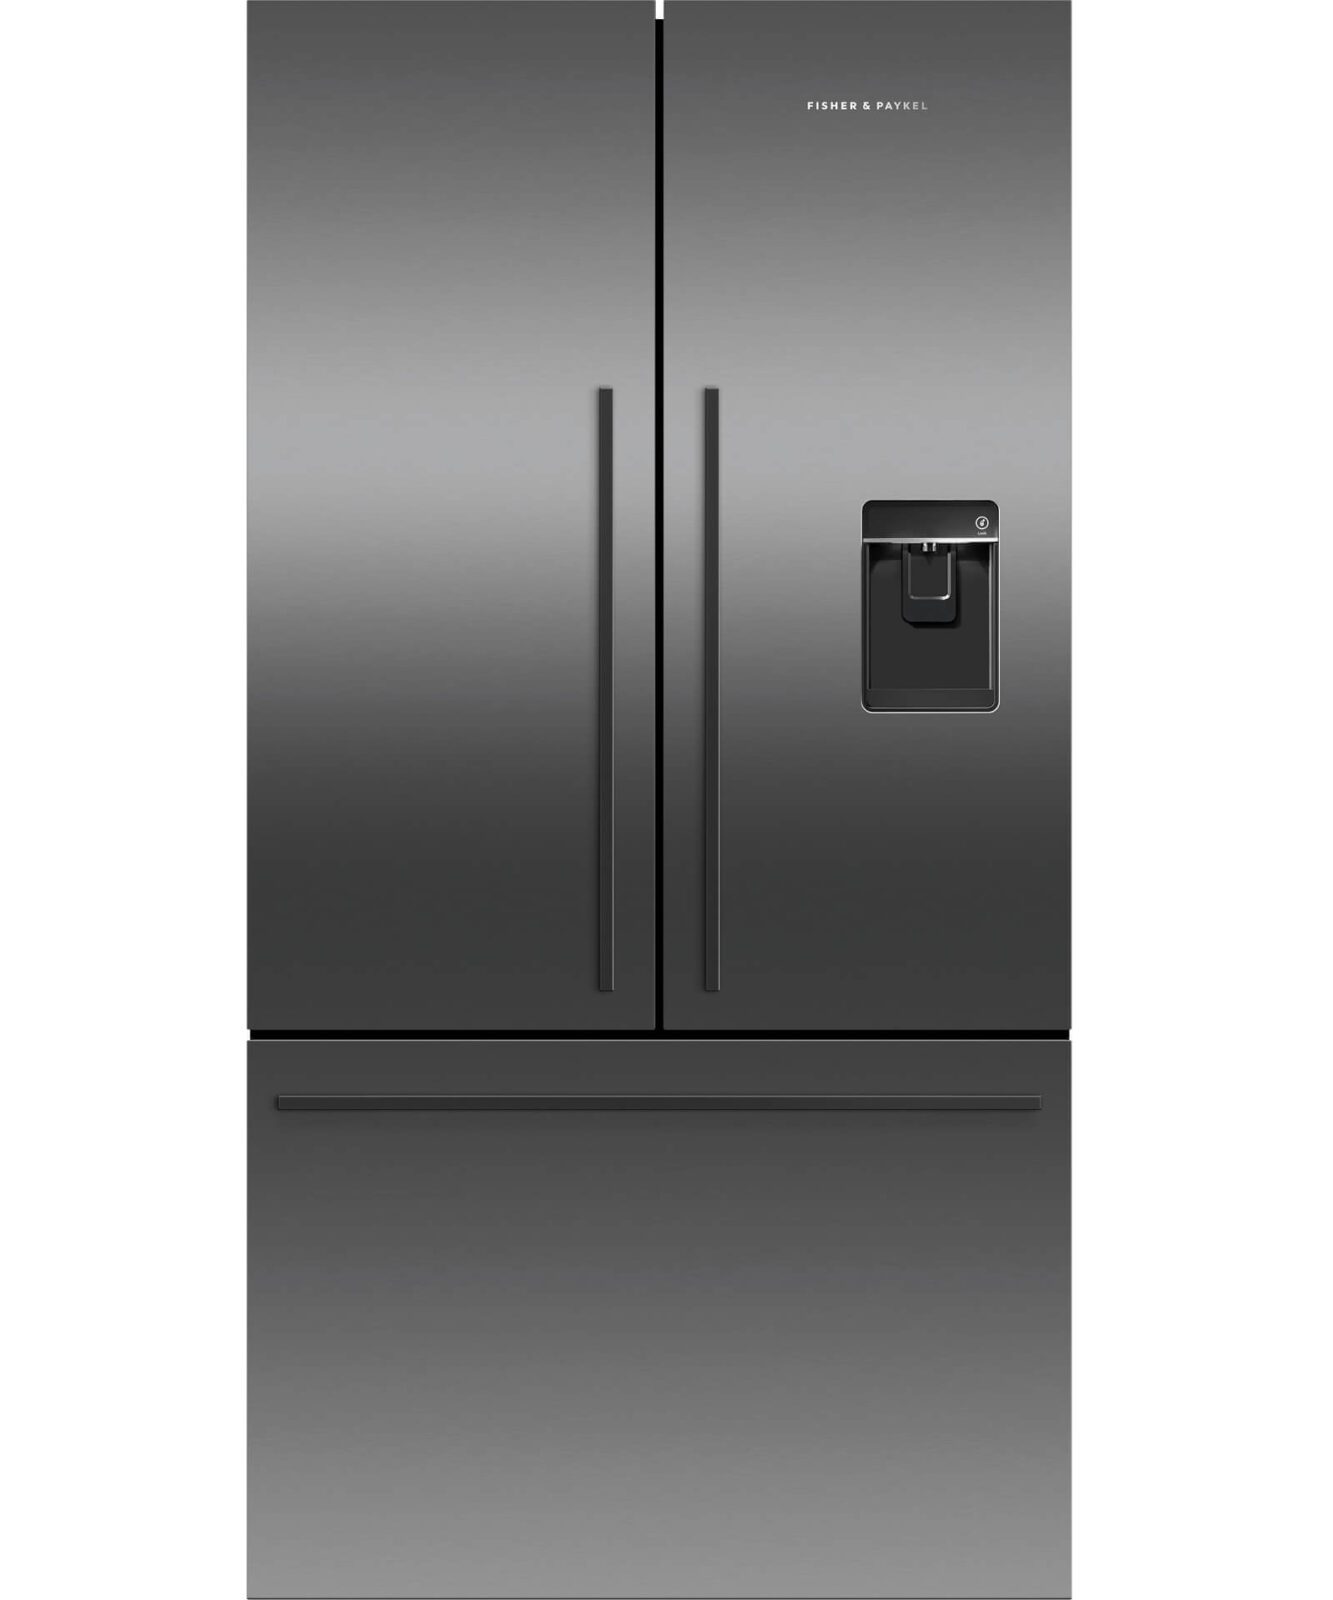 Produktvideos Fisher&paykel